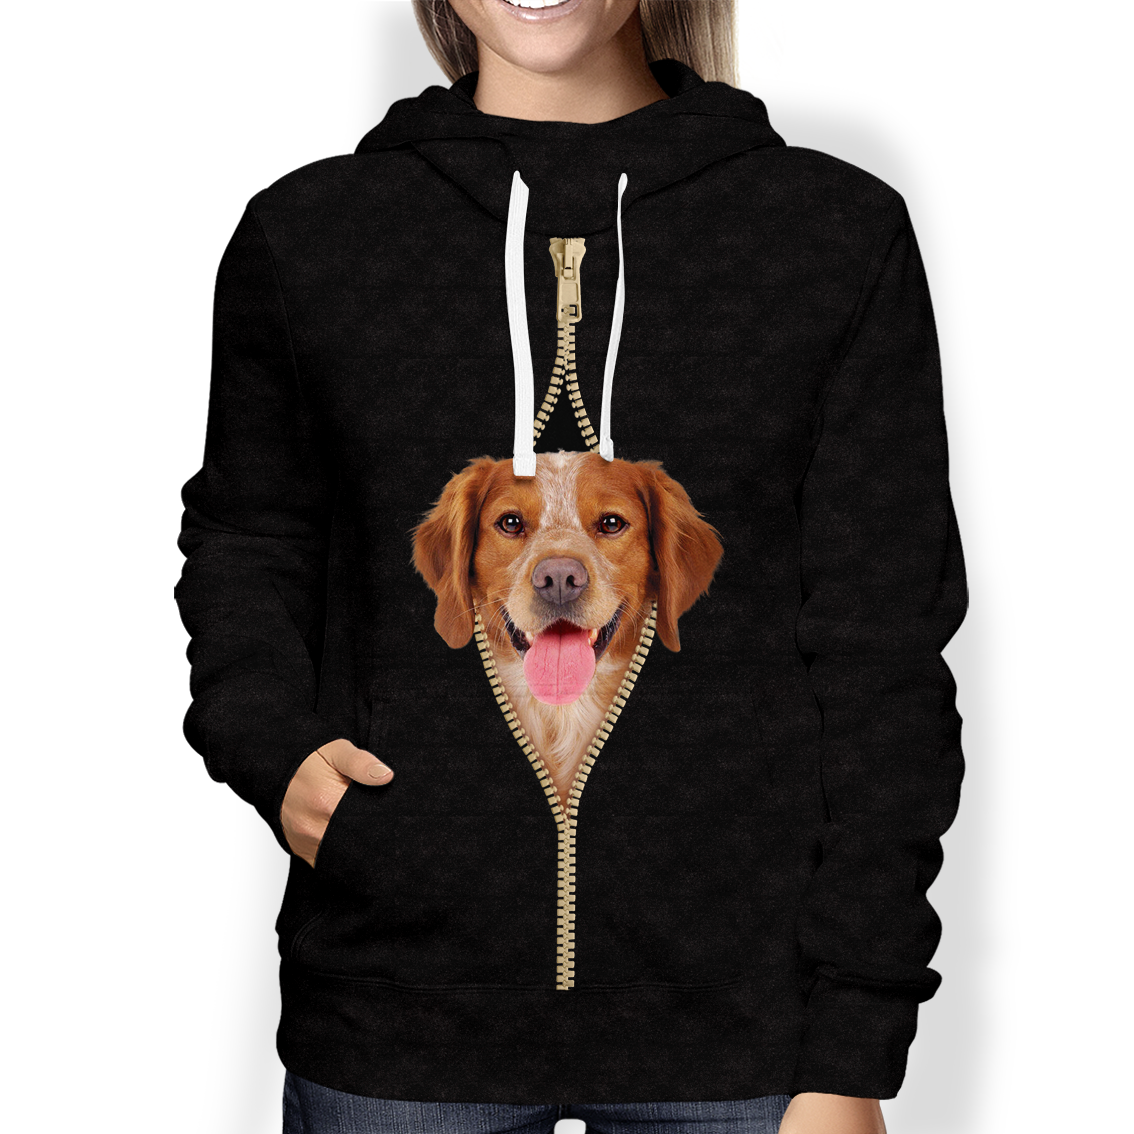 I'm With You - Brittany Spaniel Hoodie V1